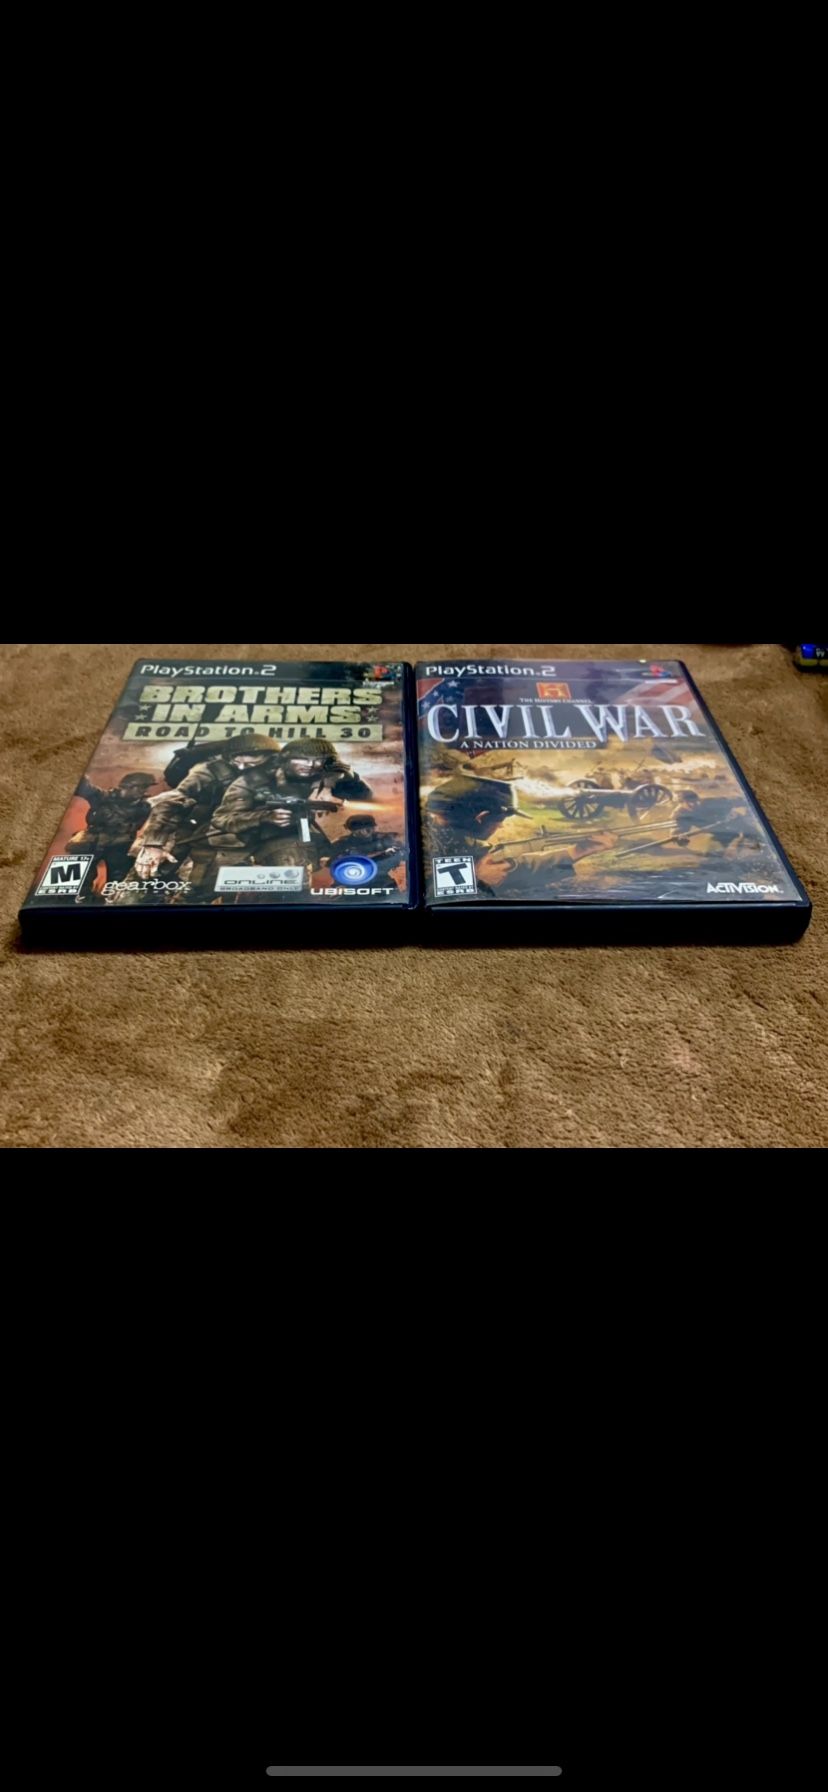 Brothers In Arms: Road To Hill 30 & History Channel: Civil War: A Nation Divided (Sony PlayStation 2) ($10 for both together)